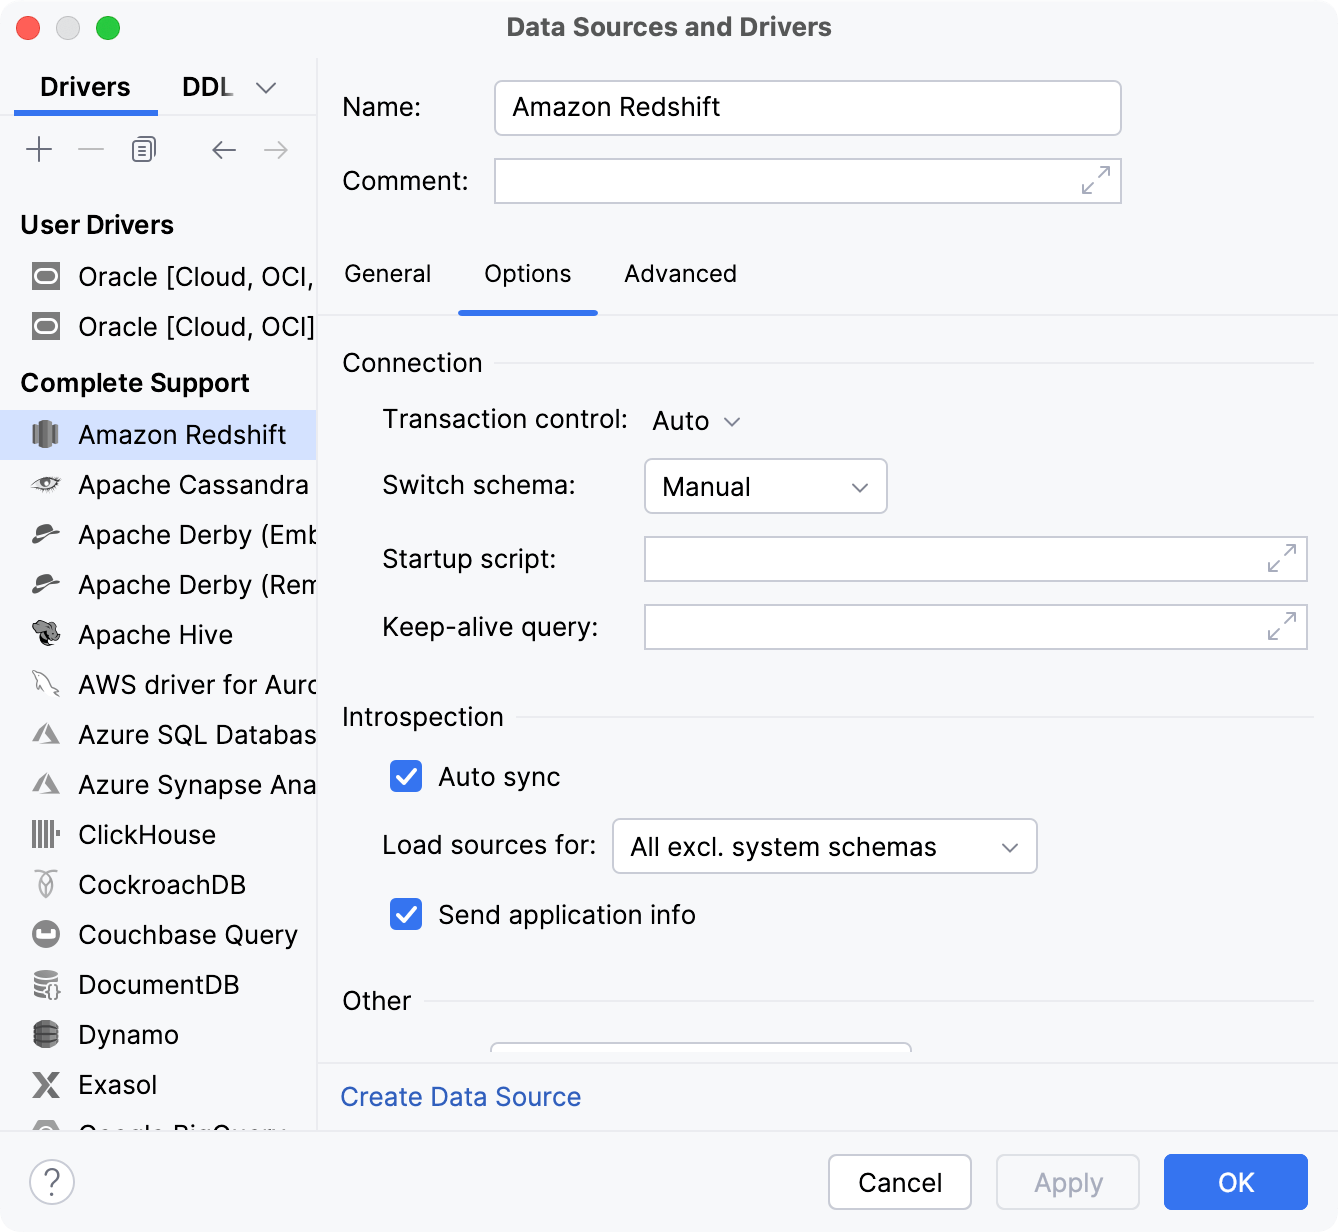 Data Source and Drivers dialog: Options tab of Drivers settings